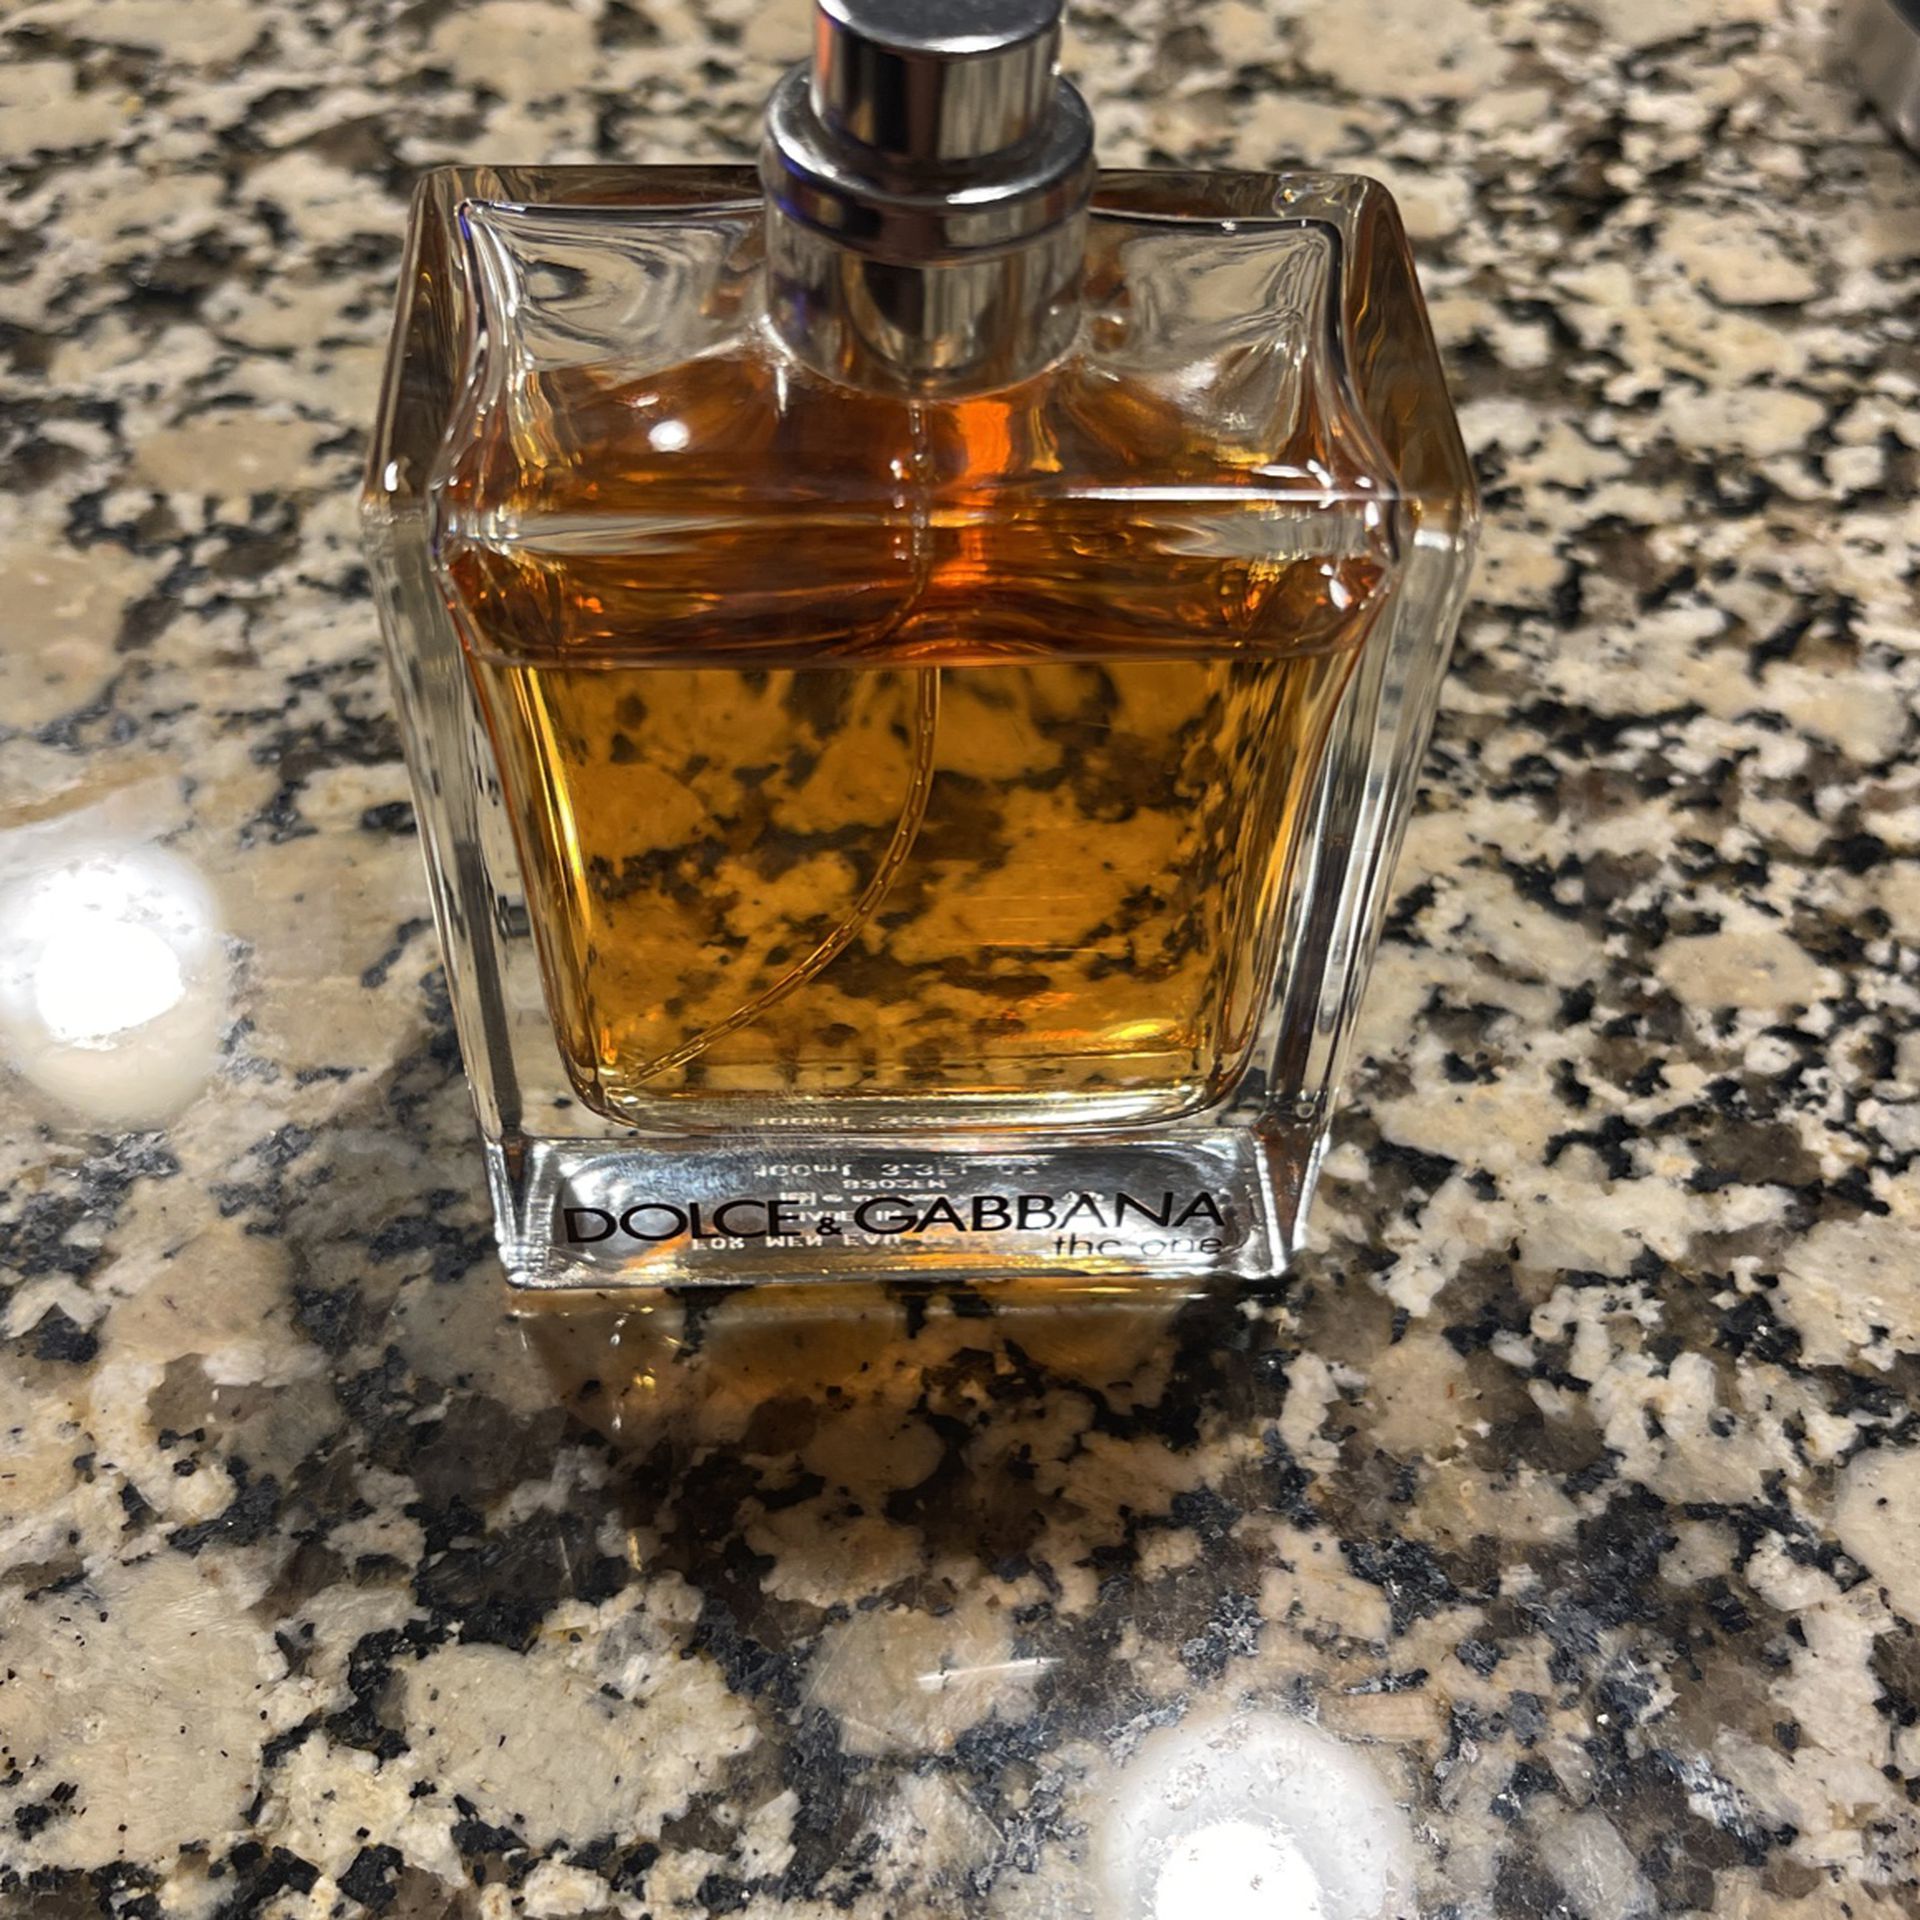 Dolce & Gabbana (The One) Cologne 